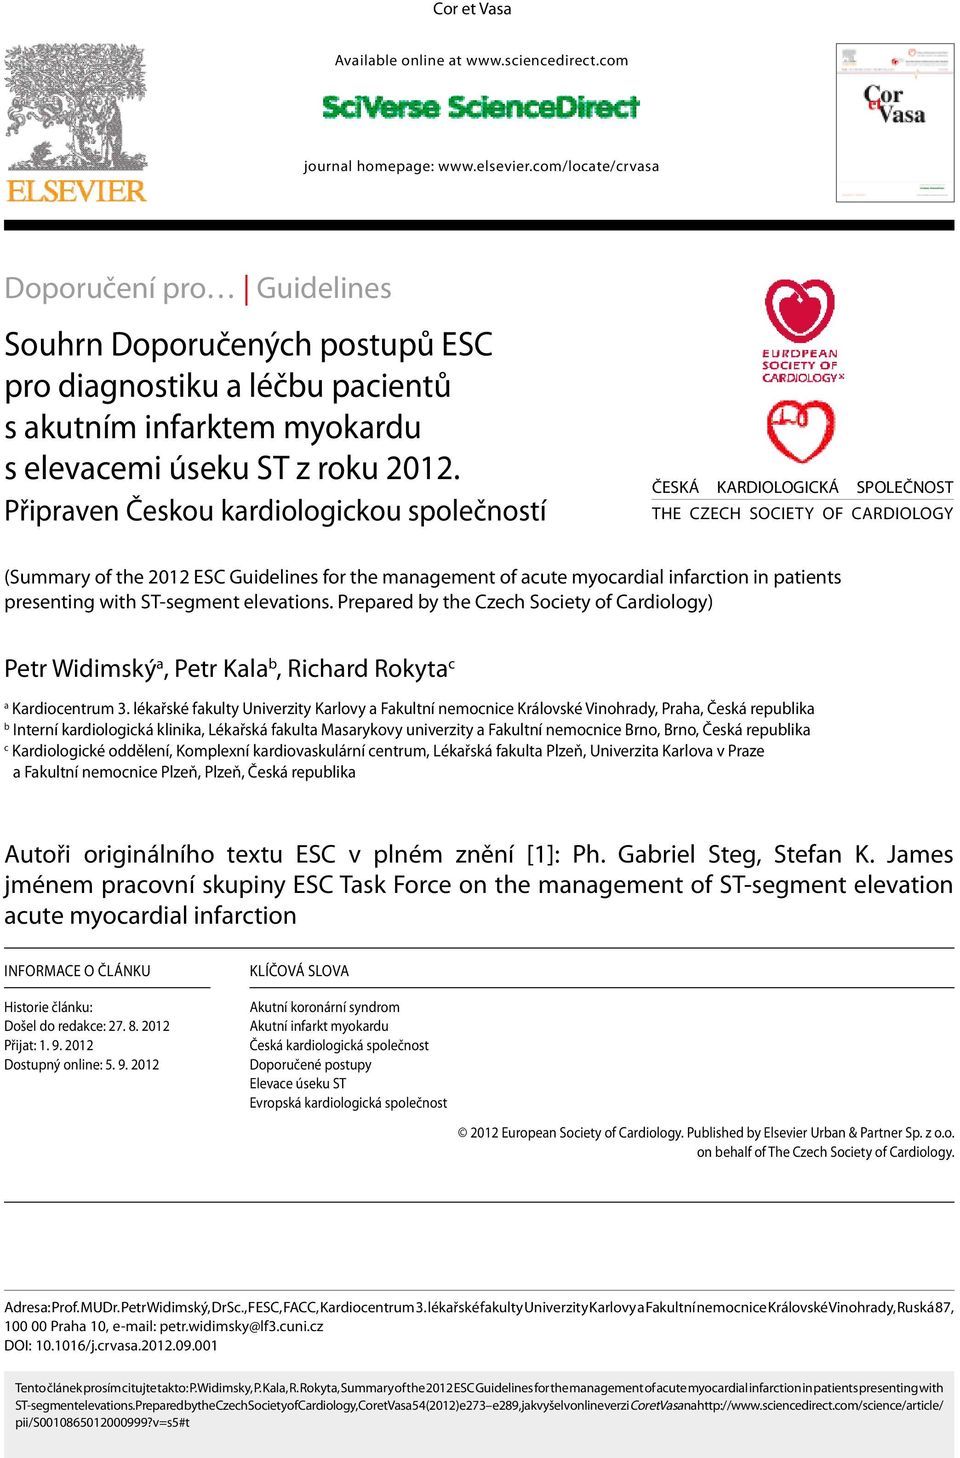 Připraven Českou kardiologickou společností Česká kardiologická společnost The czech society of cardiology (Summary of the 2012 ES Guidelines for the management of acute myocardial infarction in